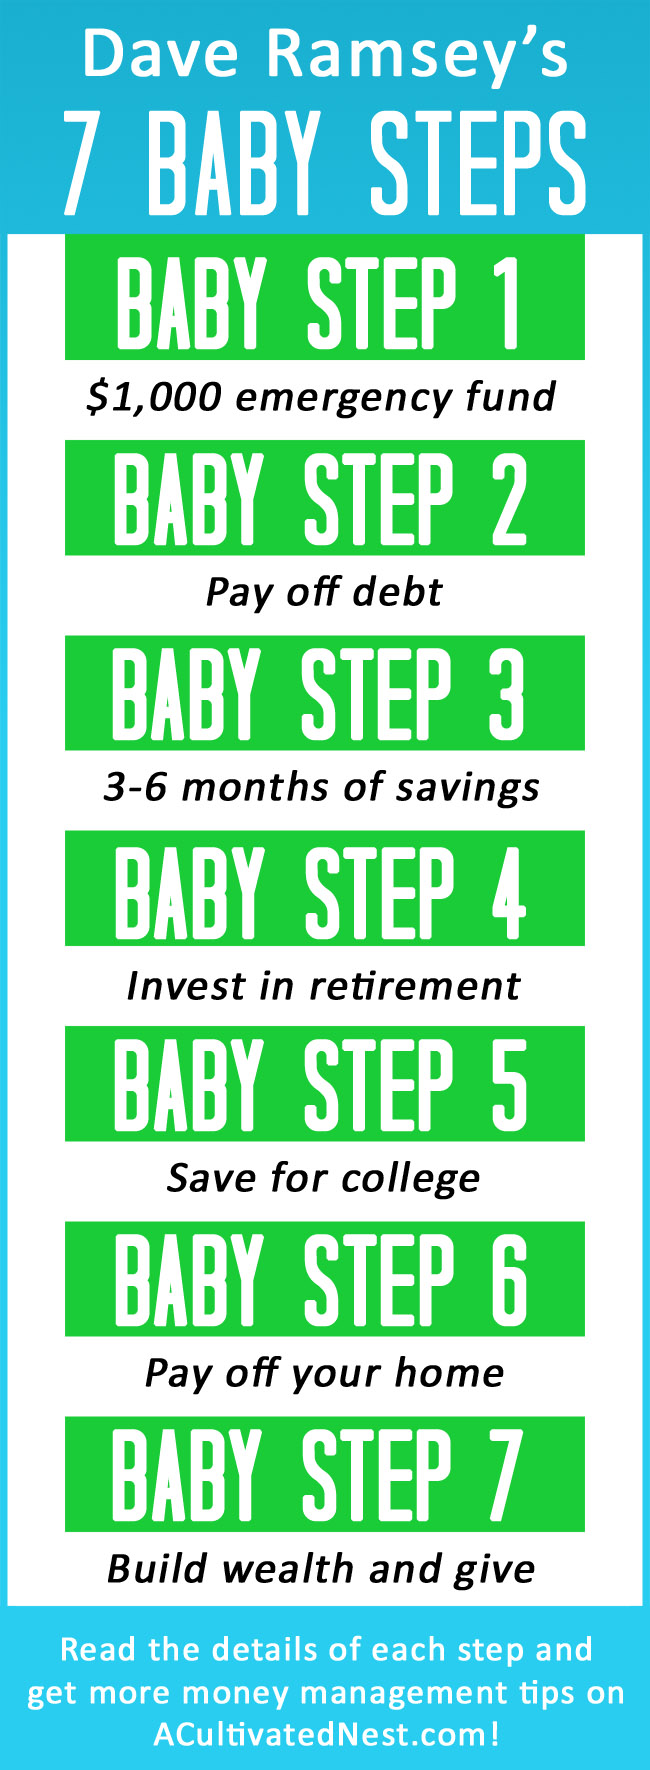 Are you trying to get debt free, but are wondering what are Dave Ramsey's seven baby steps? Don't worry, they're actually quite easy to follow!